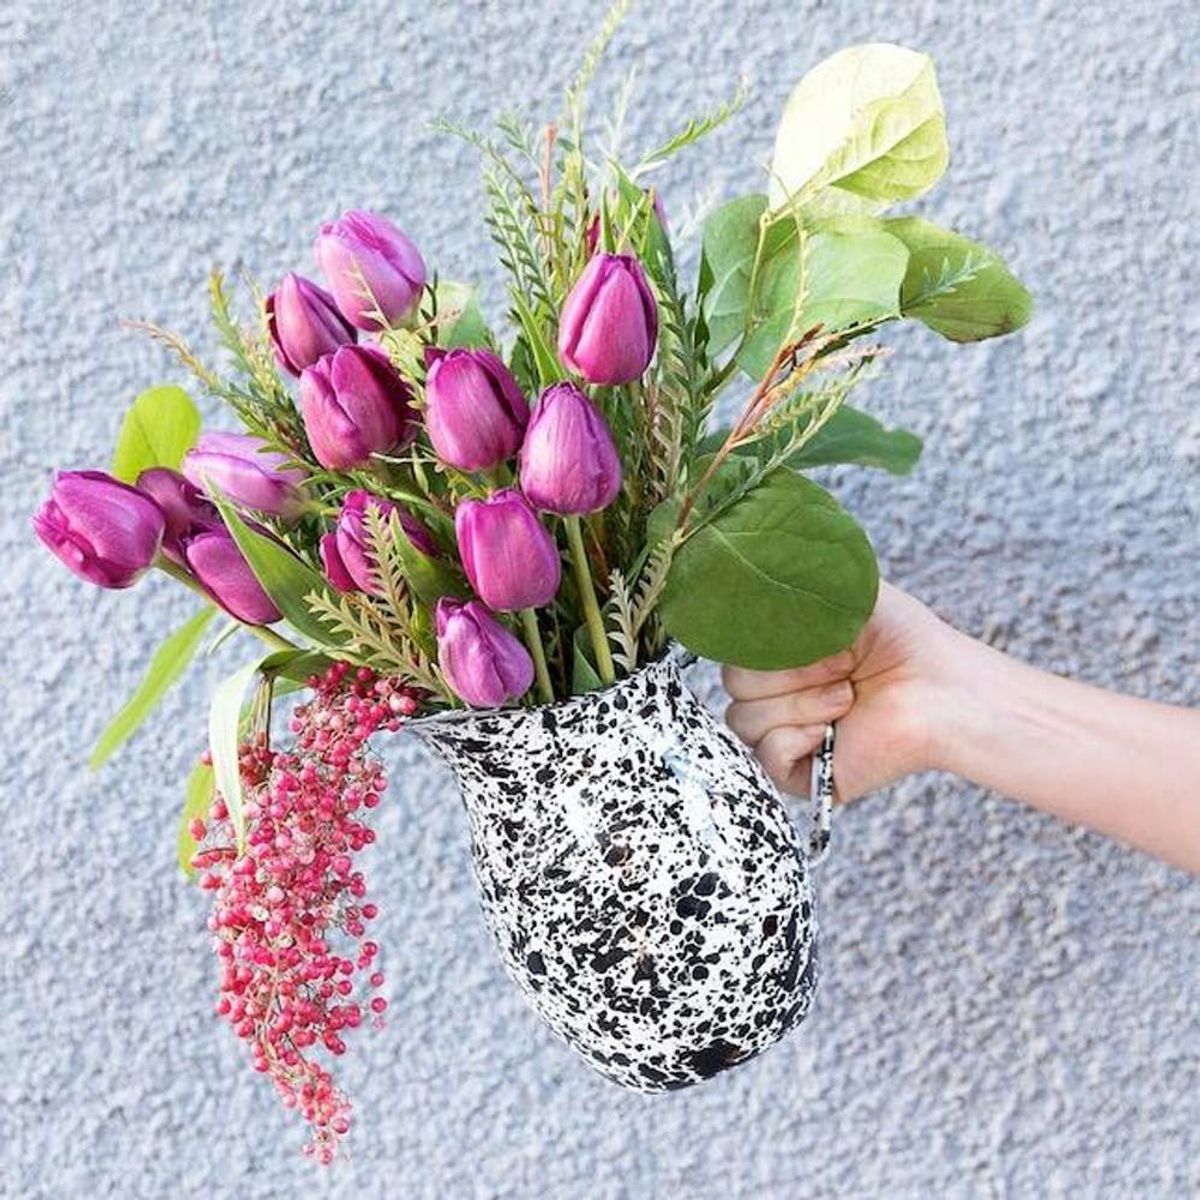 20 Insta-Worthy US Flower Shops That’ll Make You *Swoon*